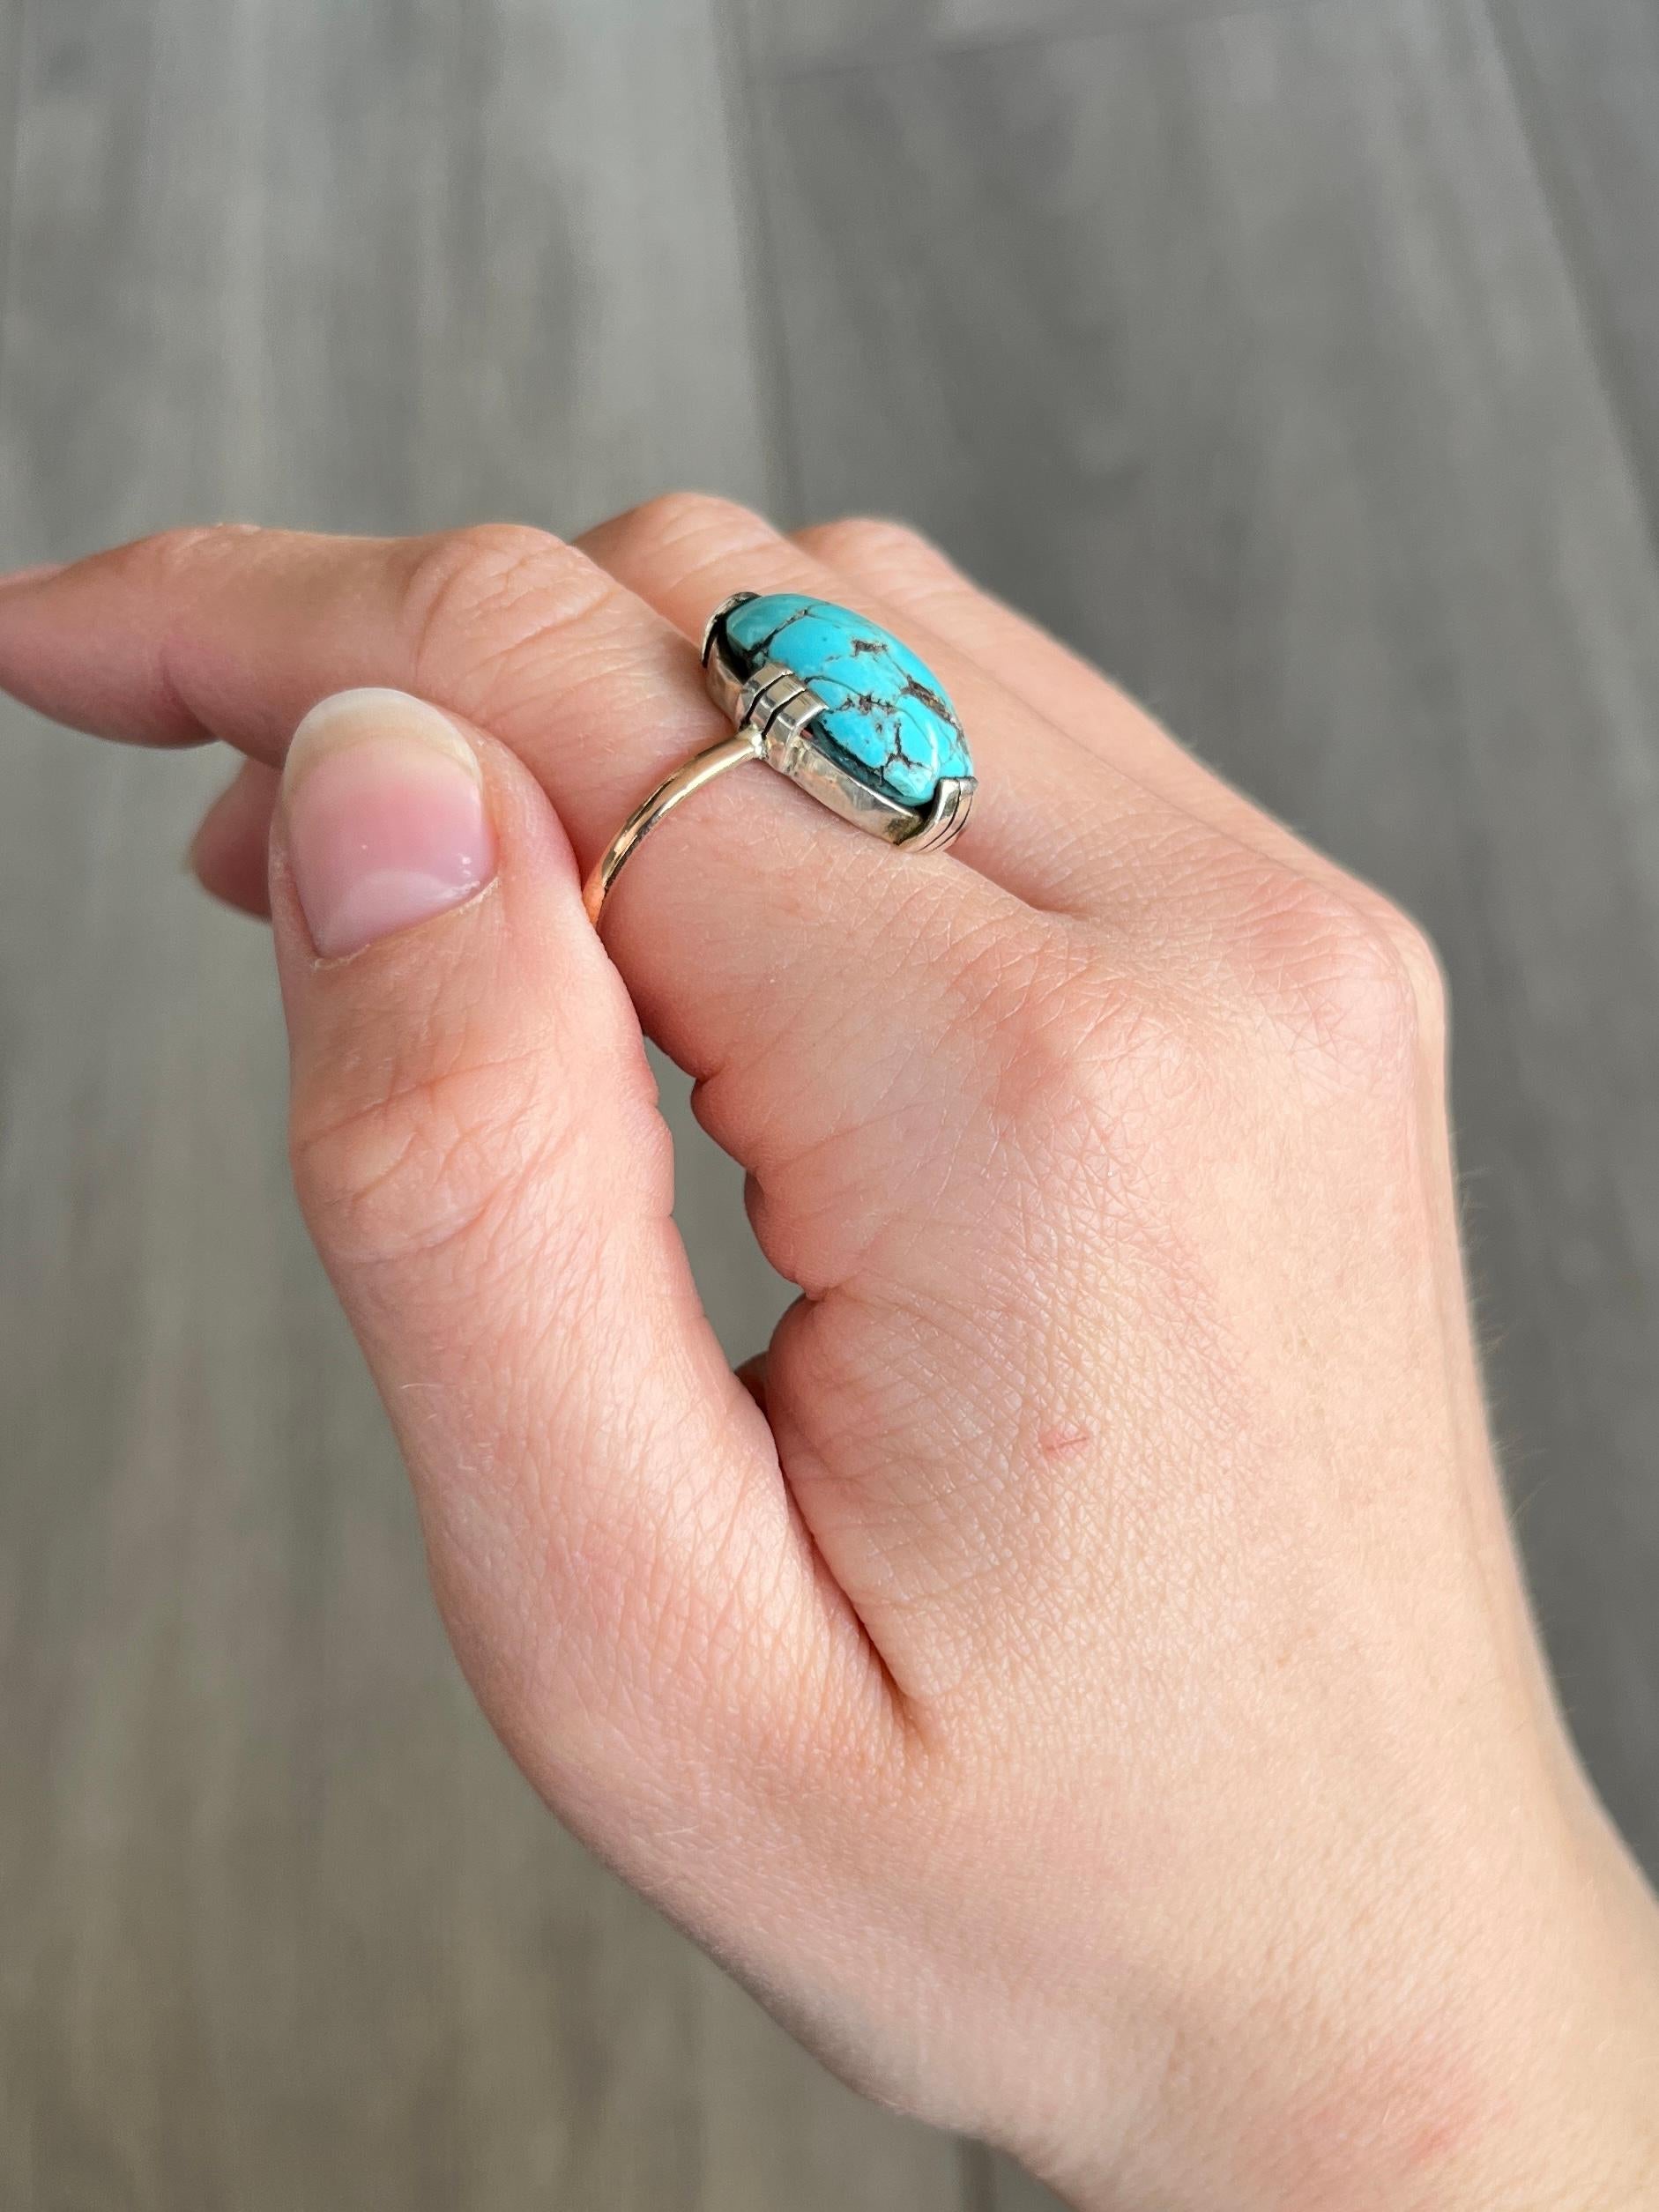 This beauty has a large turquoise stone that pops next to the silver and the rose gold band. Modelled in silver and 15carat rose gold. 

Ring Size: U 1/2 or 10 1/4 
Stone Dimensions: 18x12mm

Weight: 4.4g